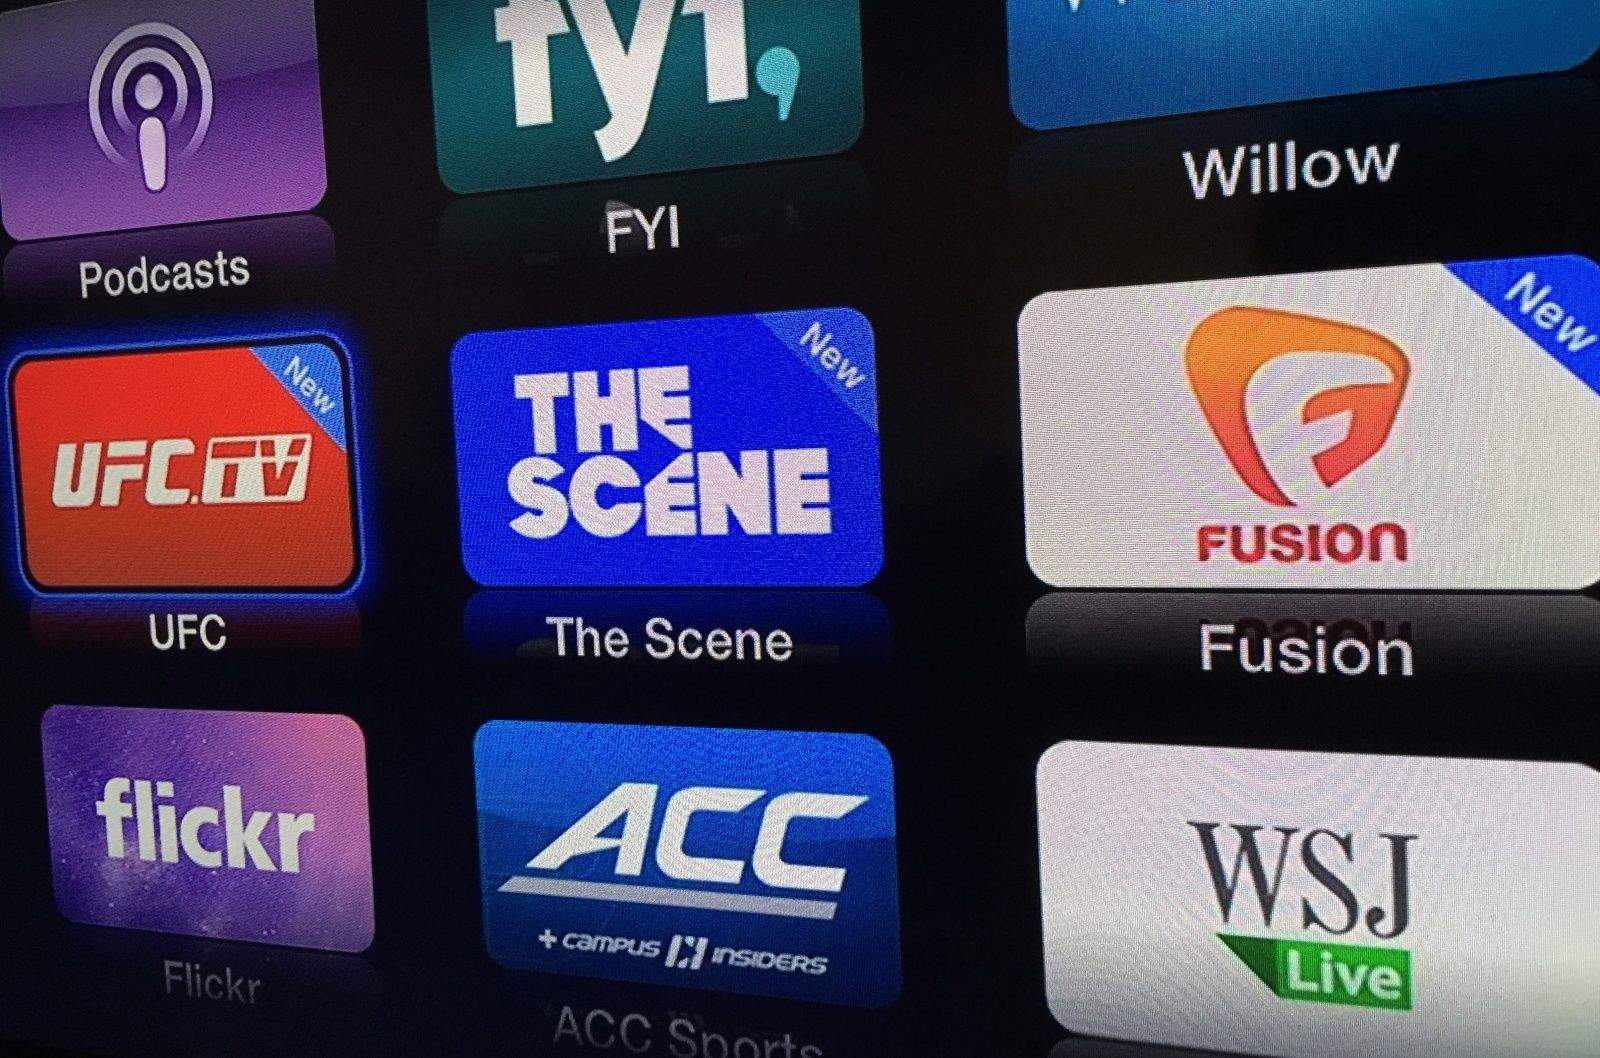 The new YouTube experience on Apple TV has ads. Blech.  Photo: Buster Hein/Cult of Mac